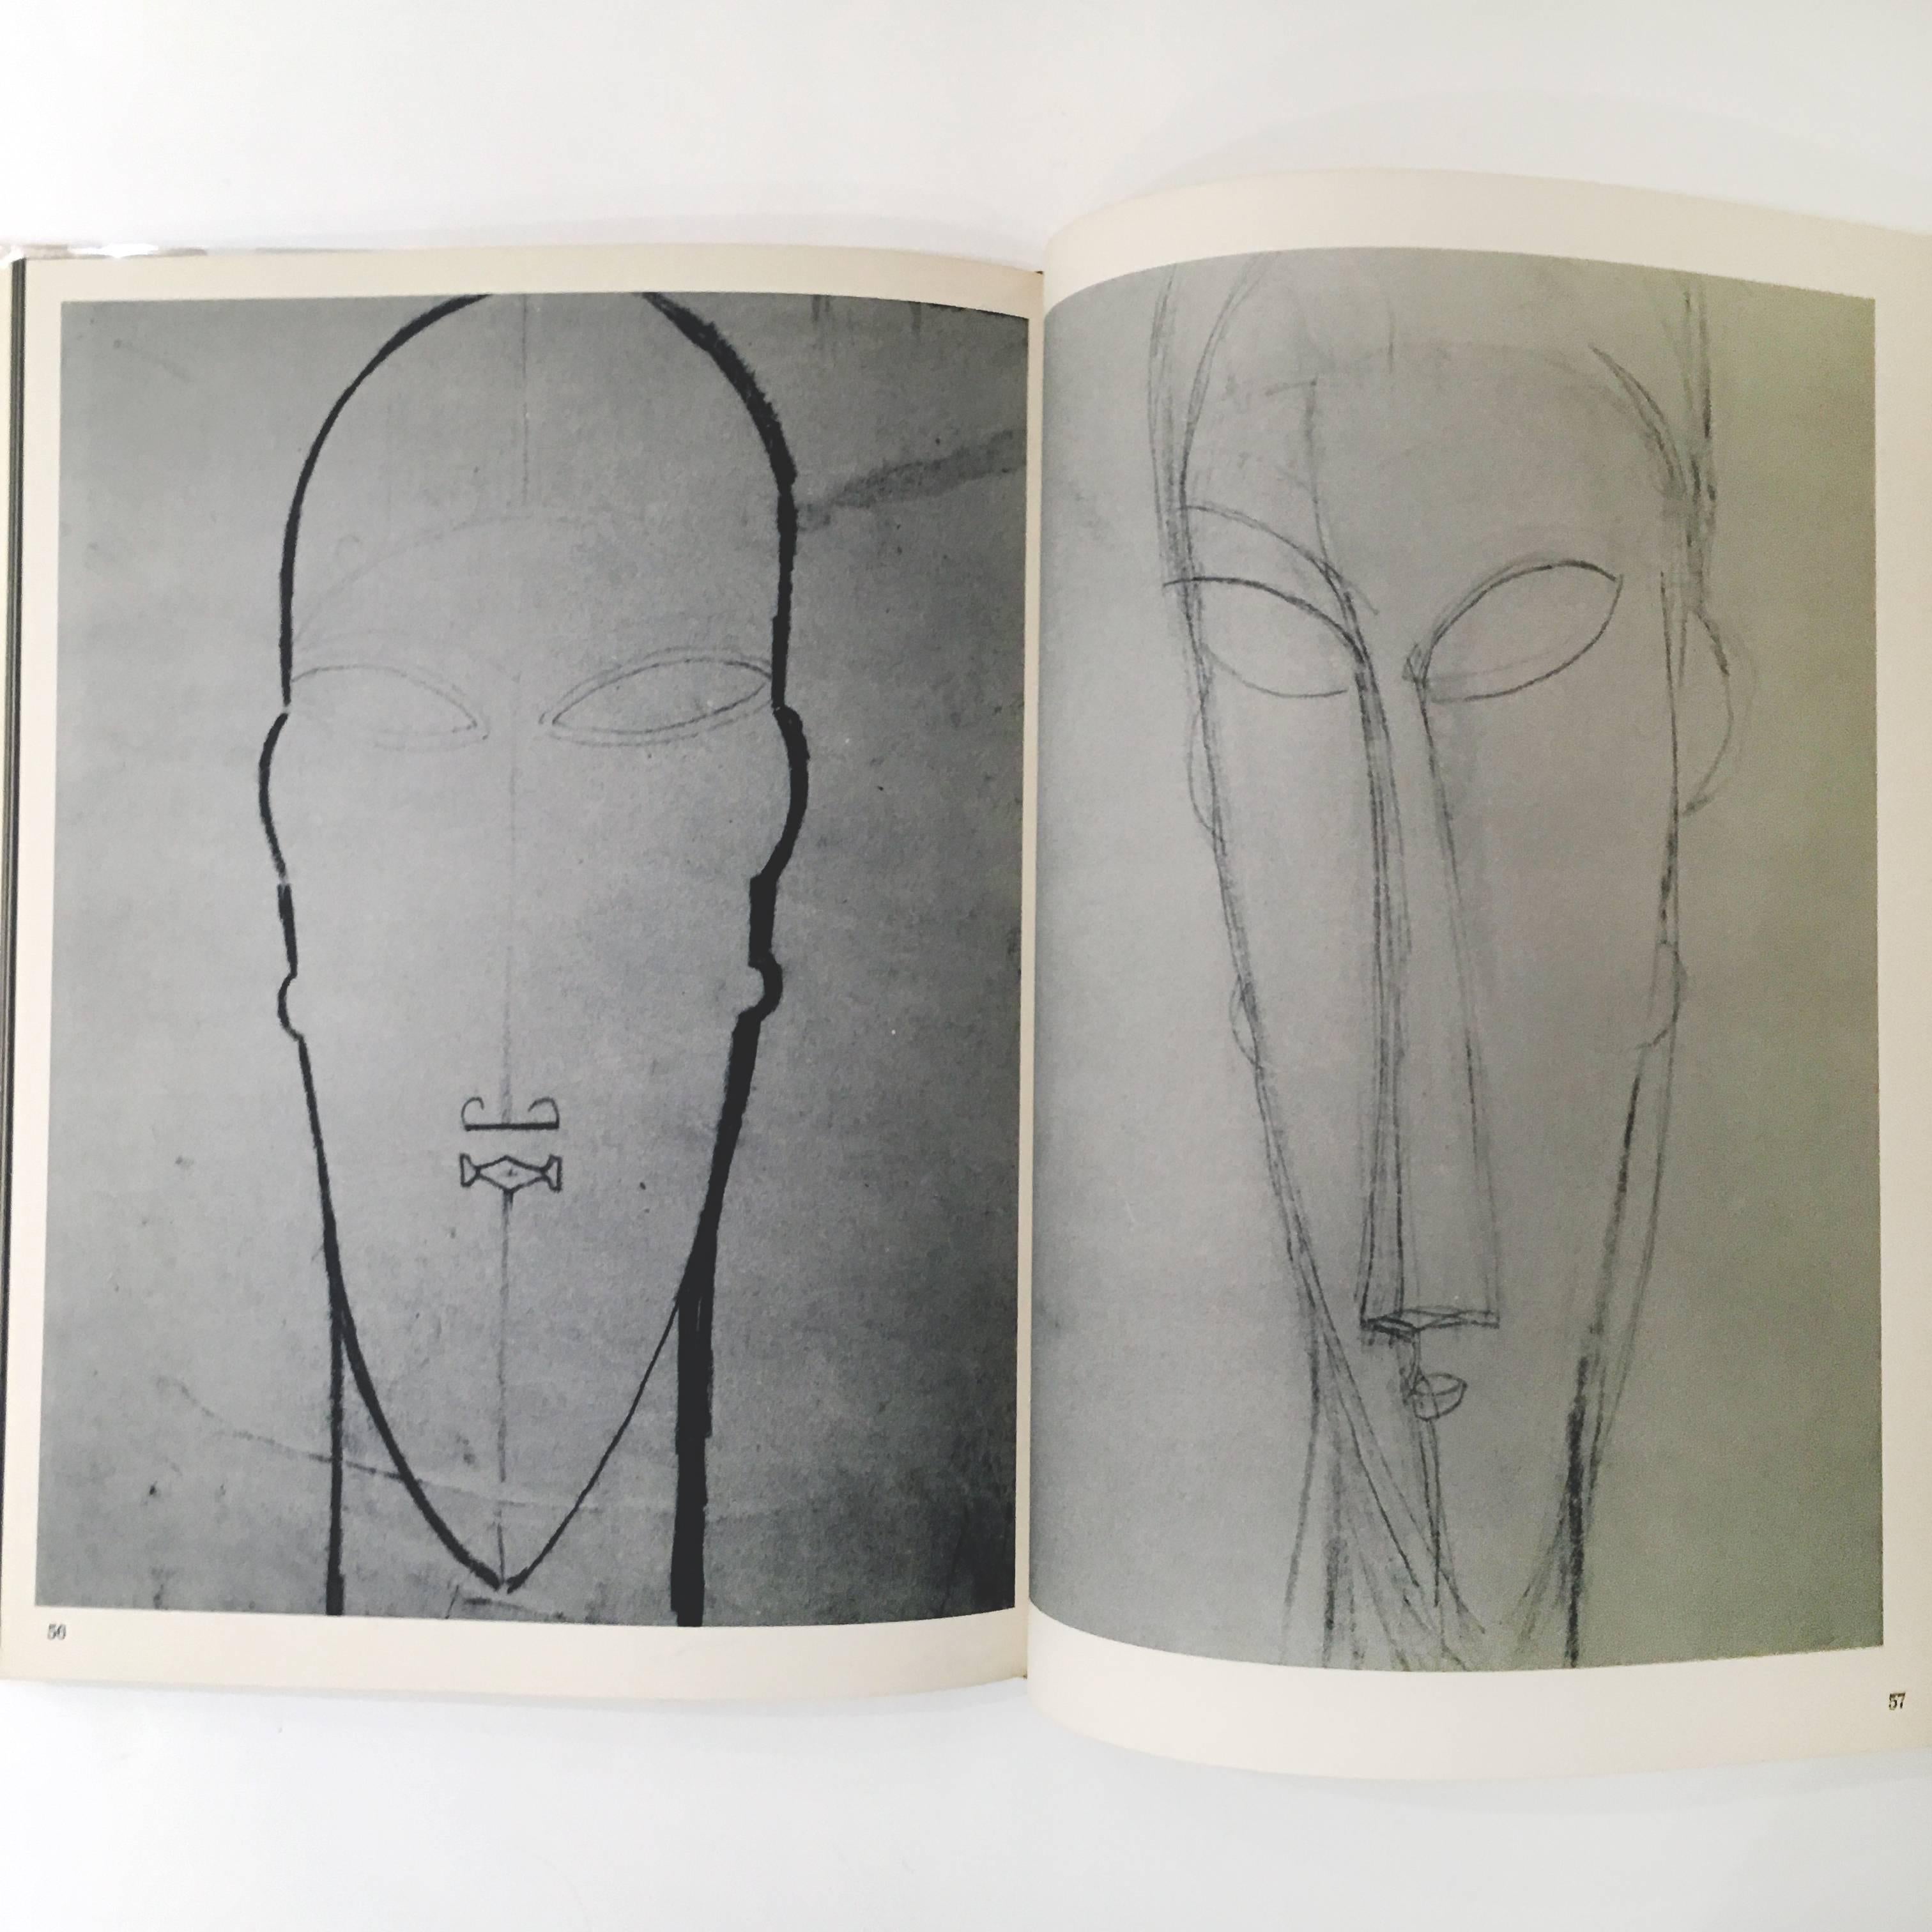 Published by Art, Inc, New York, first edition, 1962.

This was the first book published on Modigliani's sculpture, the book is filled with beautifully printed black and white images of Modigliani's work sourced from museums and private